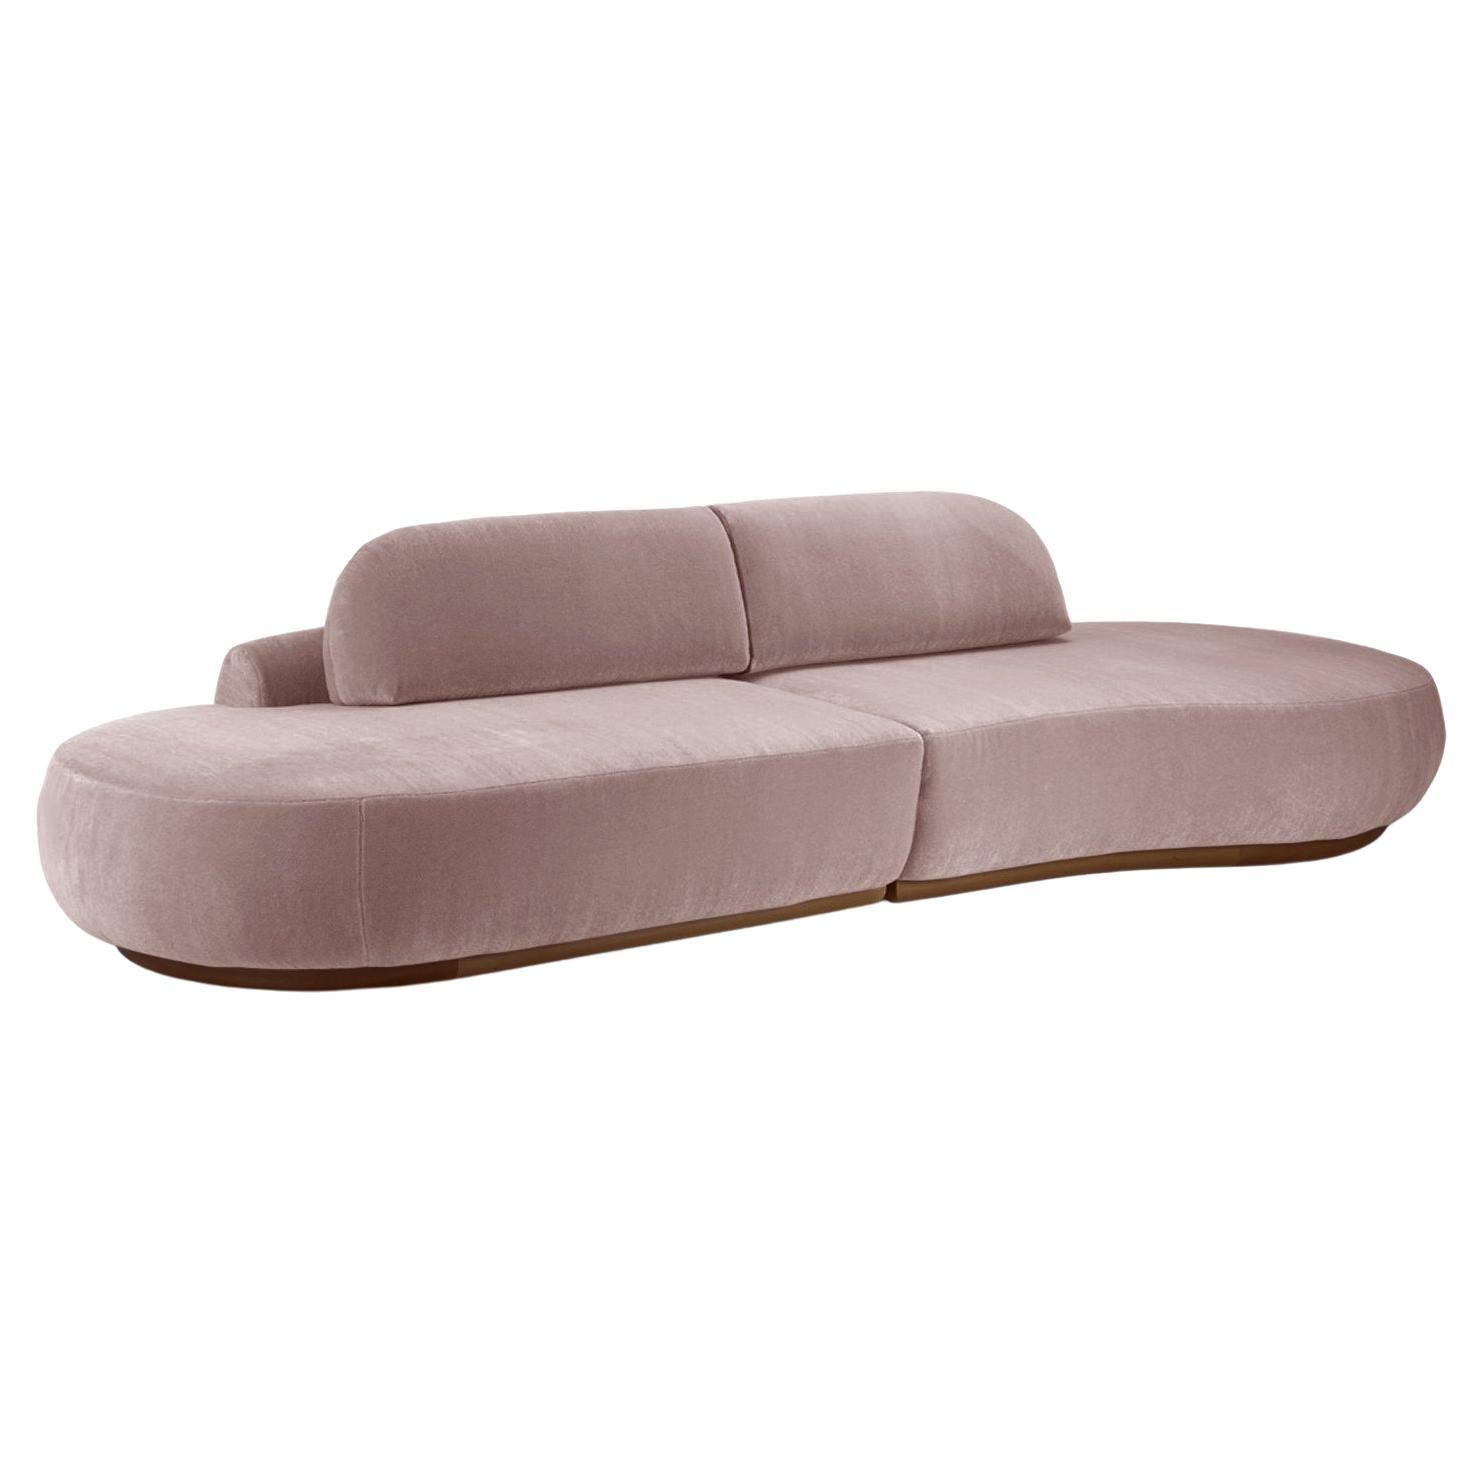 Naked Curved Sectional Sofa, 2 Piece with Beech Ash-056-1 and Barcelona Lotus